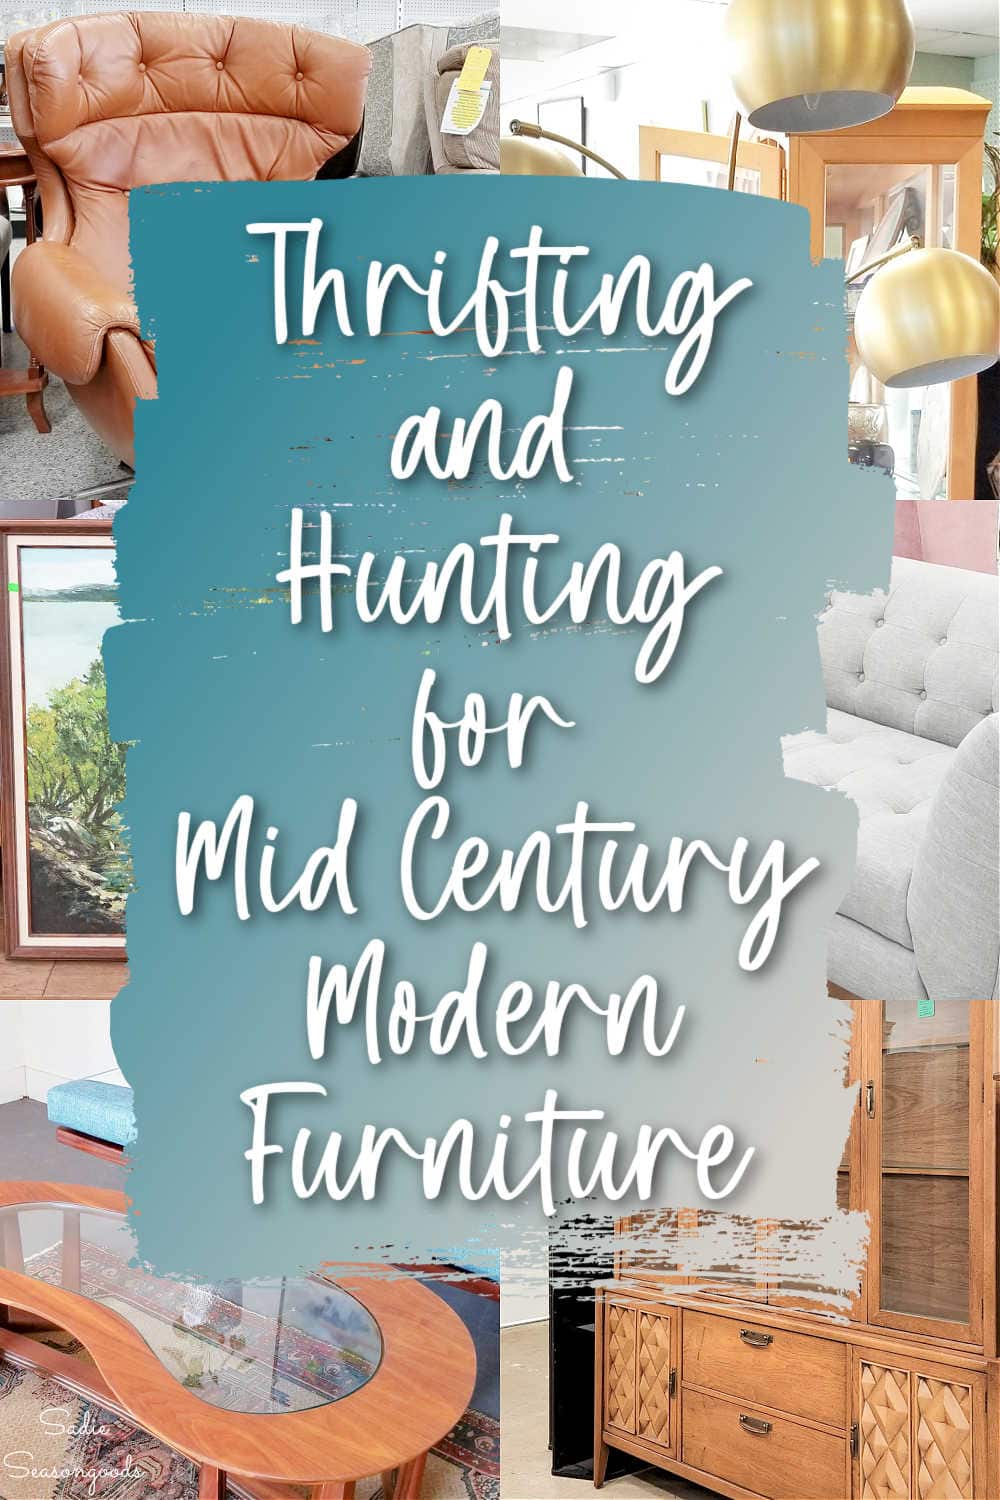 mid century modern furniture from the thrift store